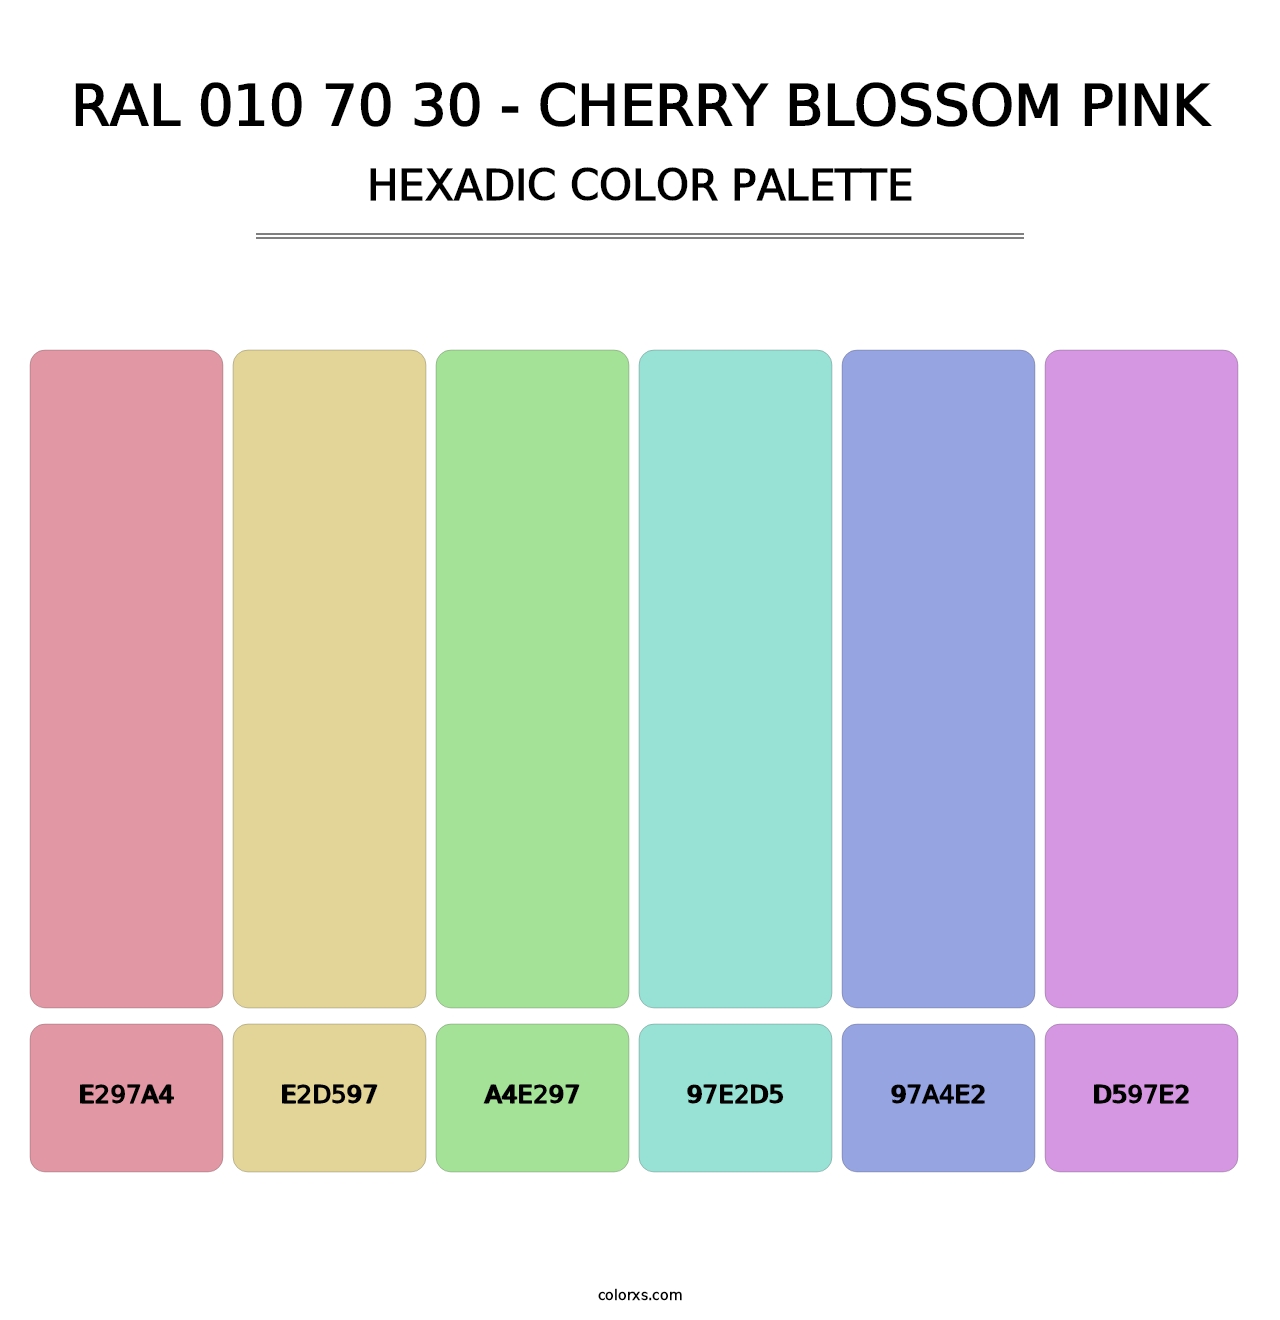 RAL 010 70 30 - Cherry Blossom Pink - Hexadic Color Palette